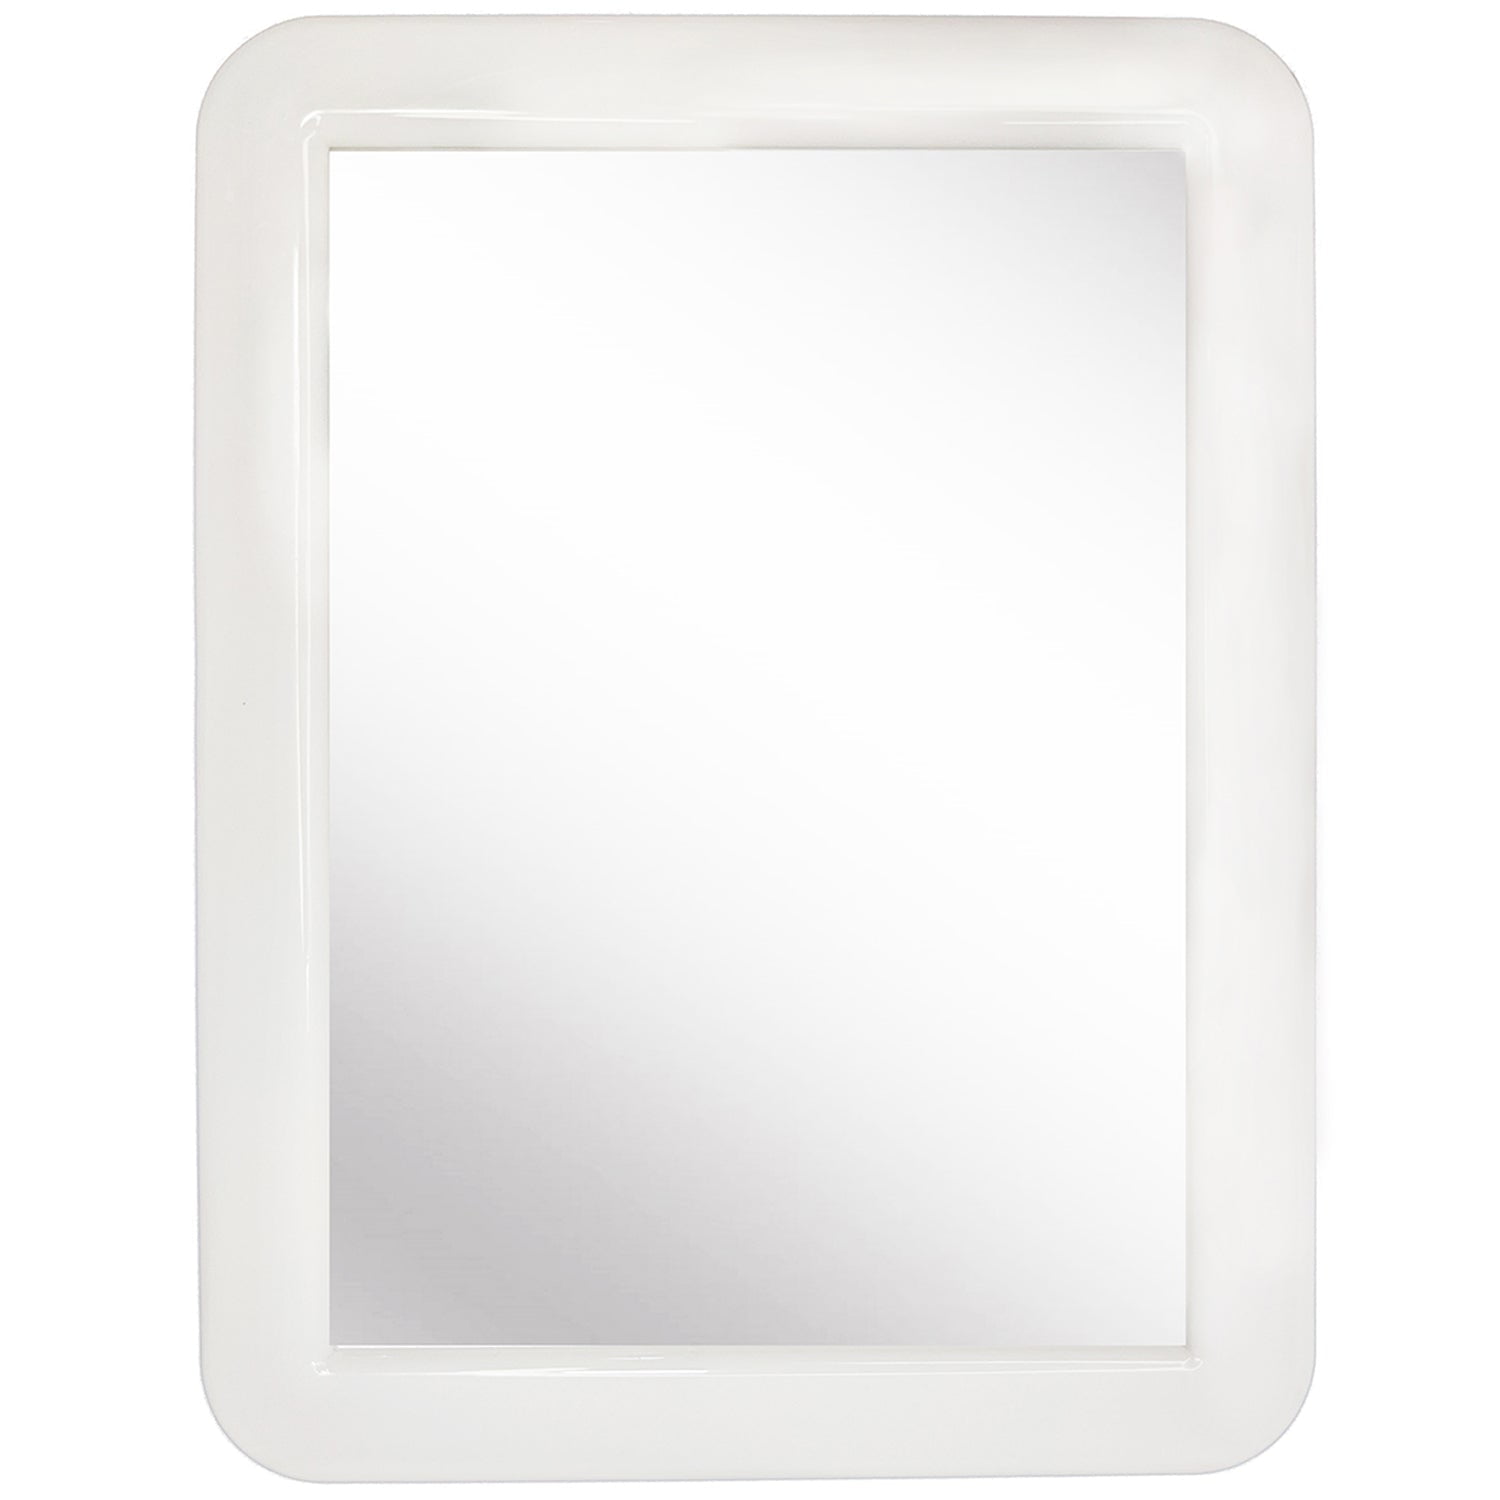 CEREM Magnetic Locker Mirror, White 5 x 7 - Real Glass Make-up Mirror -  Locker Accessory for School, Home, Gym, Office 